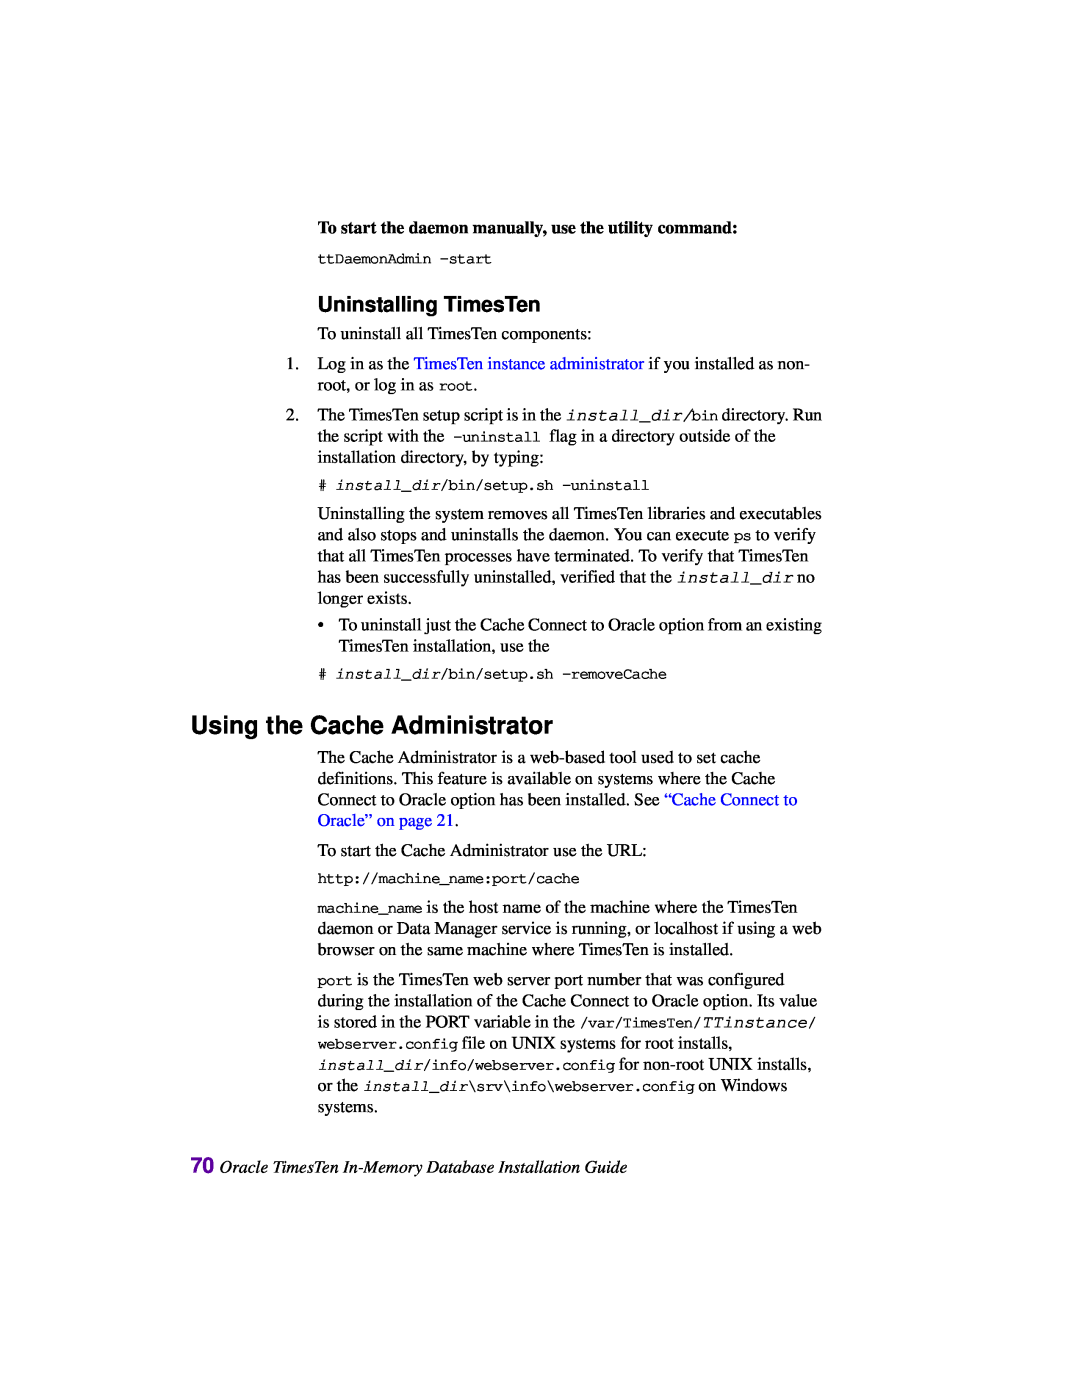 Oracle Audio Technologies B31679-01 manual Using the Cache Administrator, Uninstalling TimesTen 